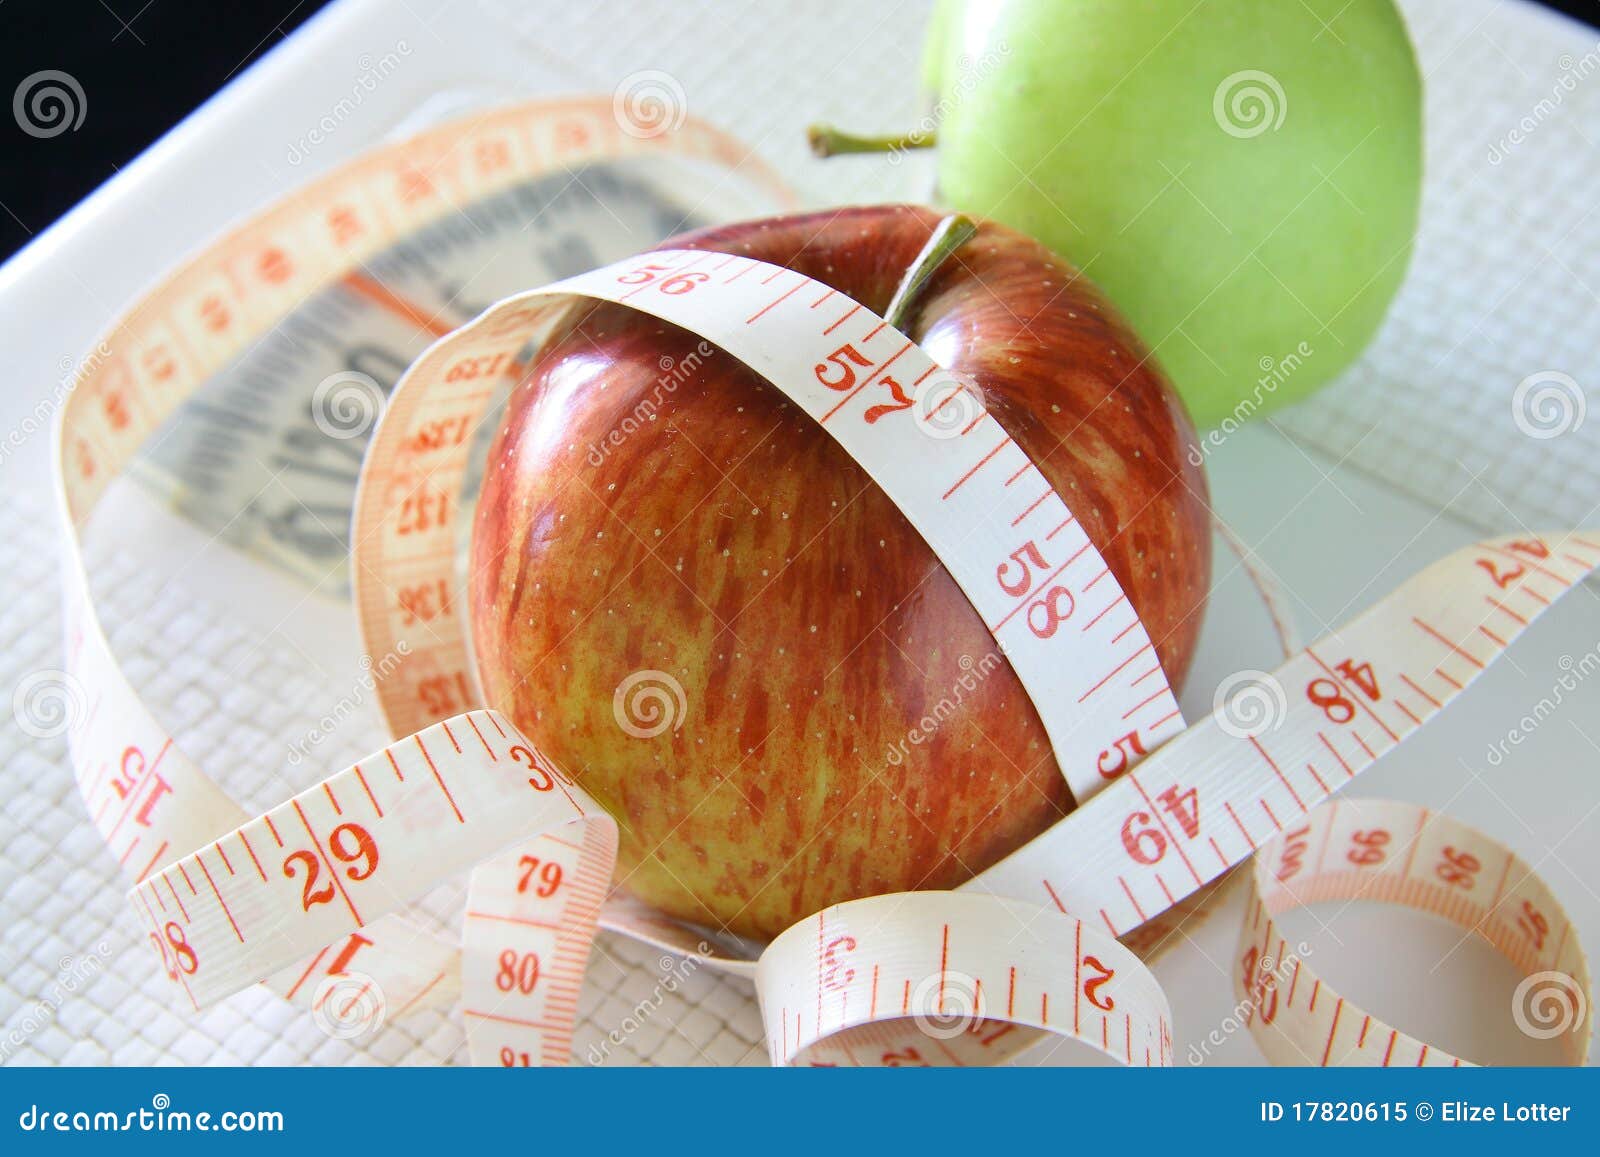 Apples for Weight Loss & Health Stock Image - Image of kilo, life: 17820615